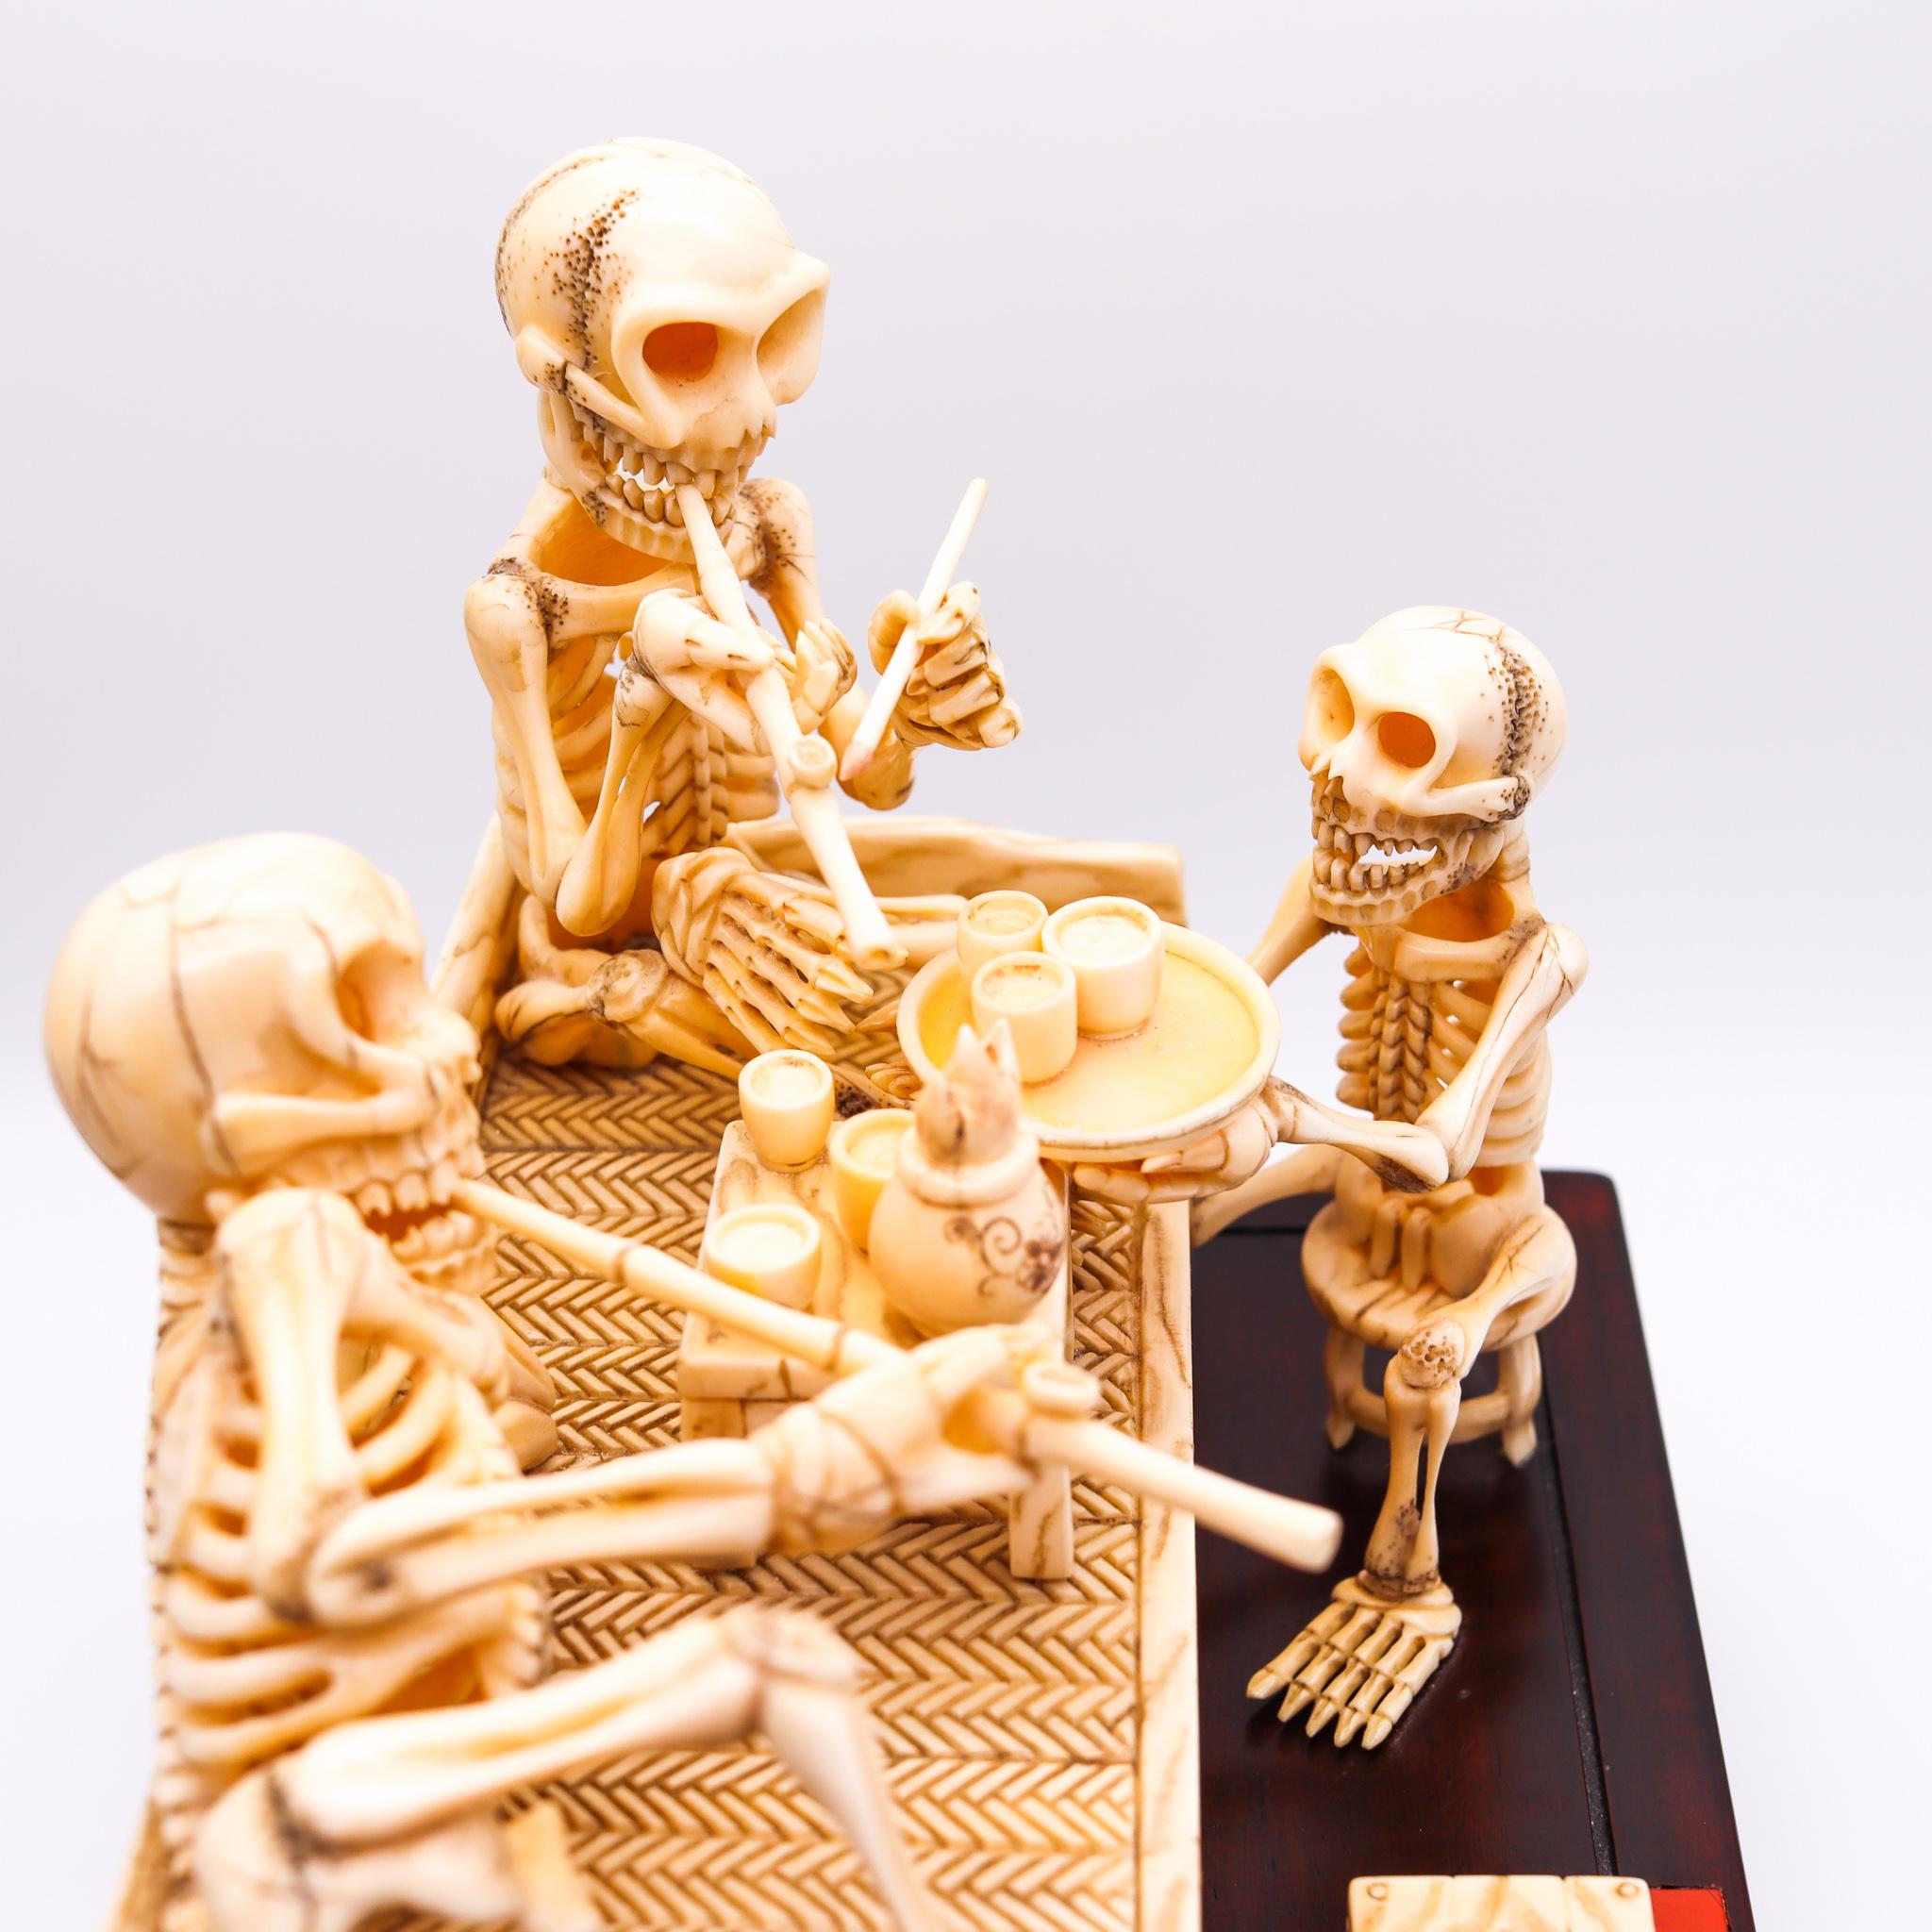 Hand-Carved Japan 1890 Meiji Period Signed Okimono Sculpture of a Group of Skeletons Smoking For Sale